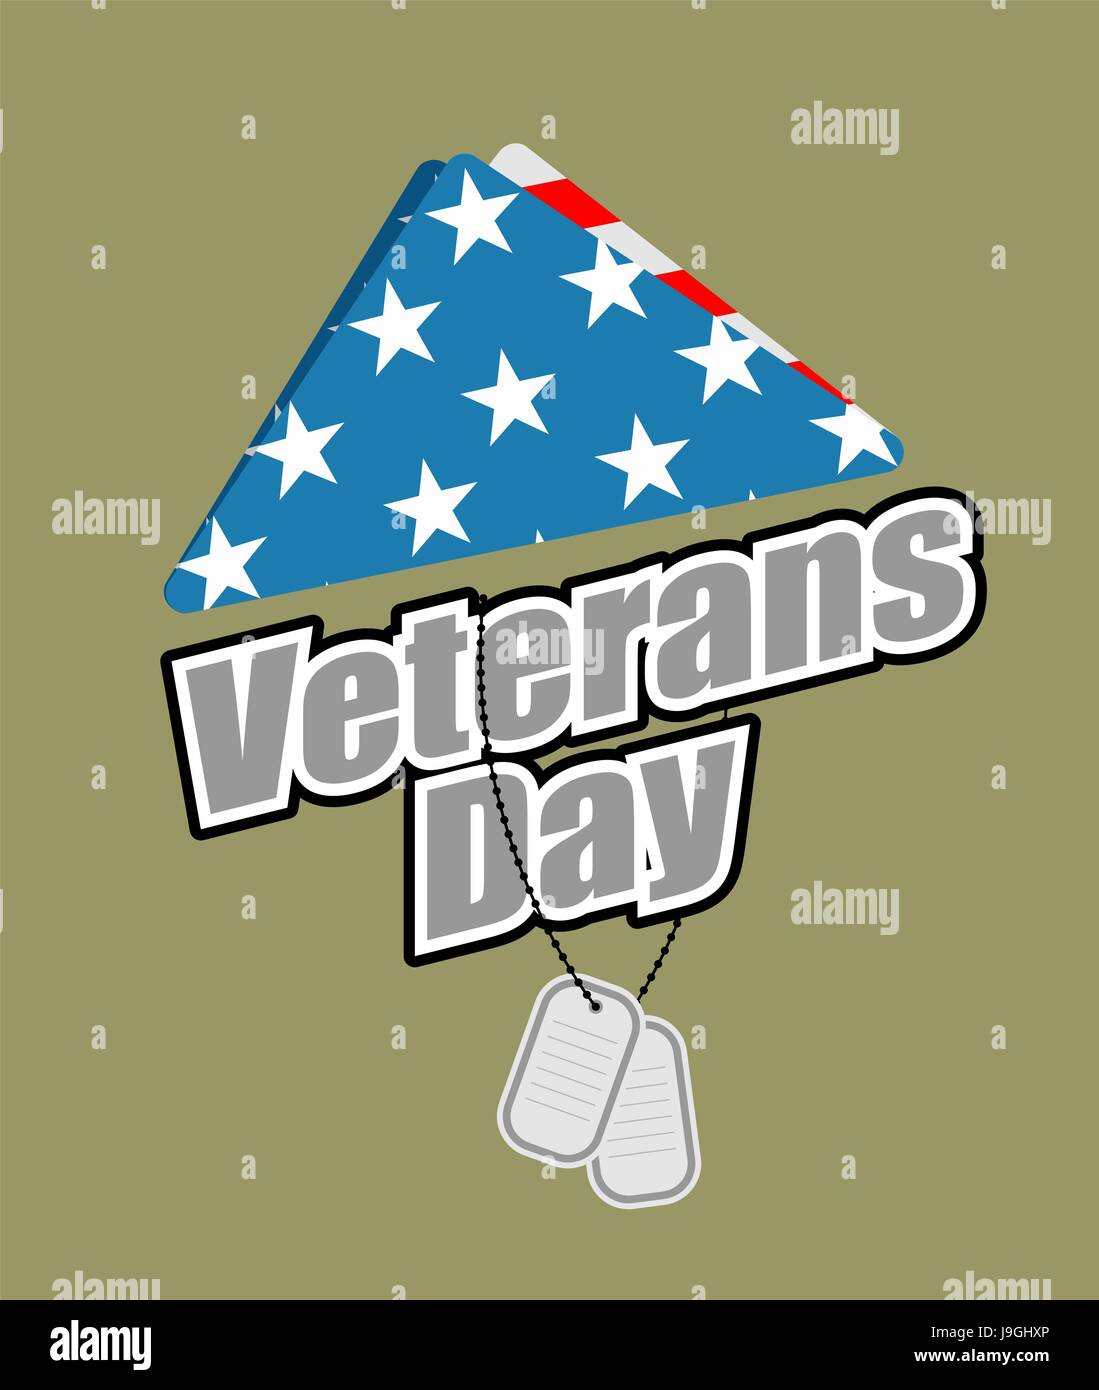 Veterans Day. USA flag symbol of mourning and grief for fallen soldiers. Emblem for national patriotic holiday. United States Flag folded in triangle. Stock Vector